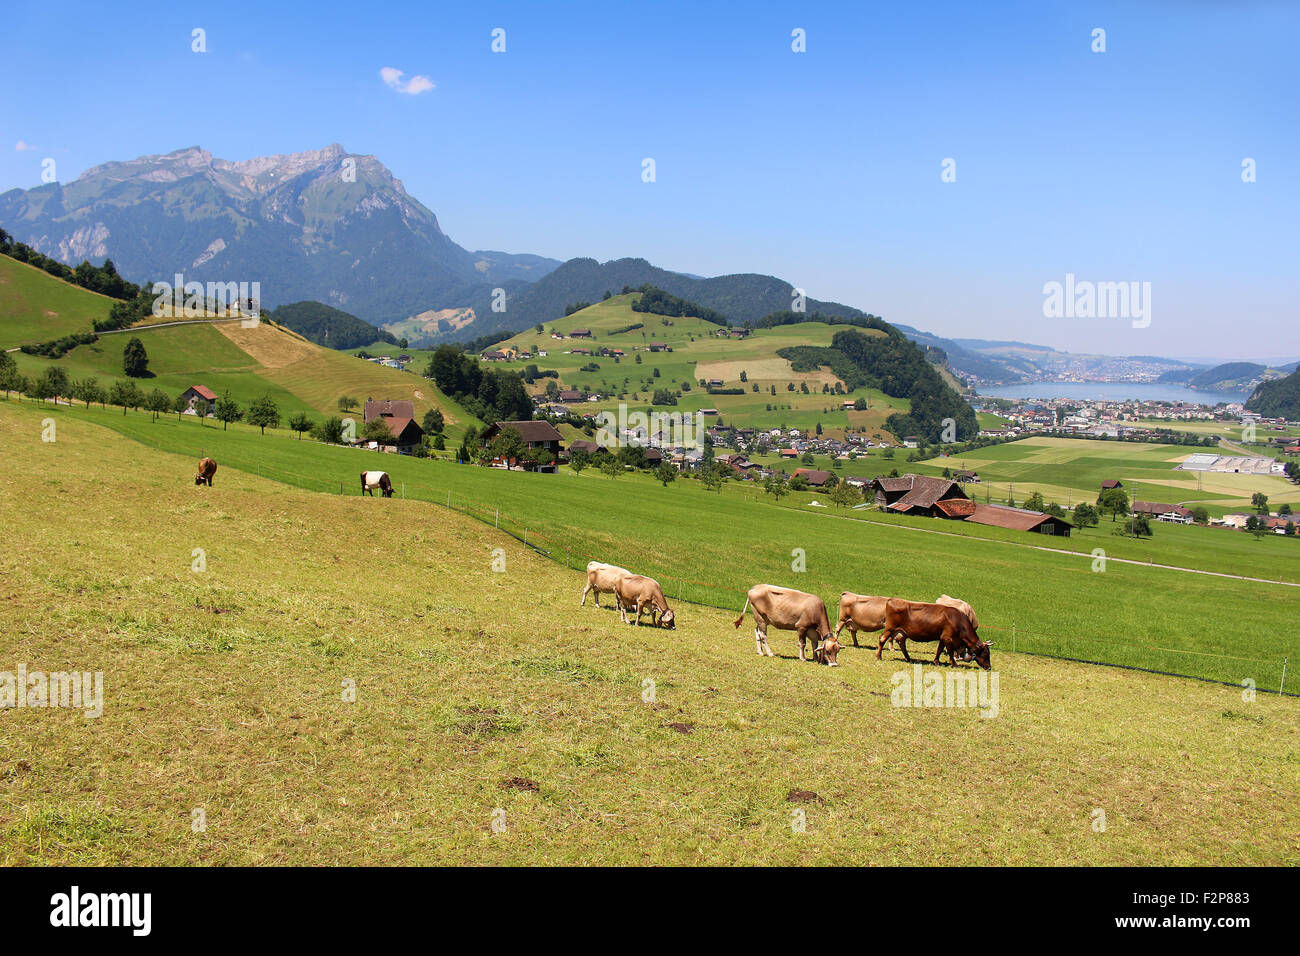 Cows grazing the grass in the hills of the Alps mountains in Switzerland on Mount Stastenhorn near Lucerne Stock Photo